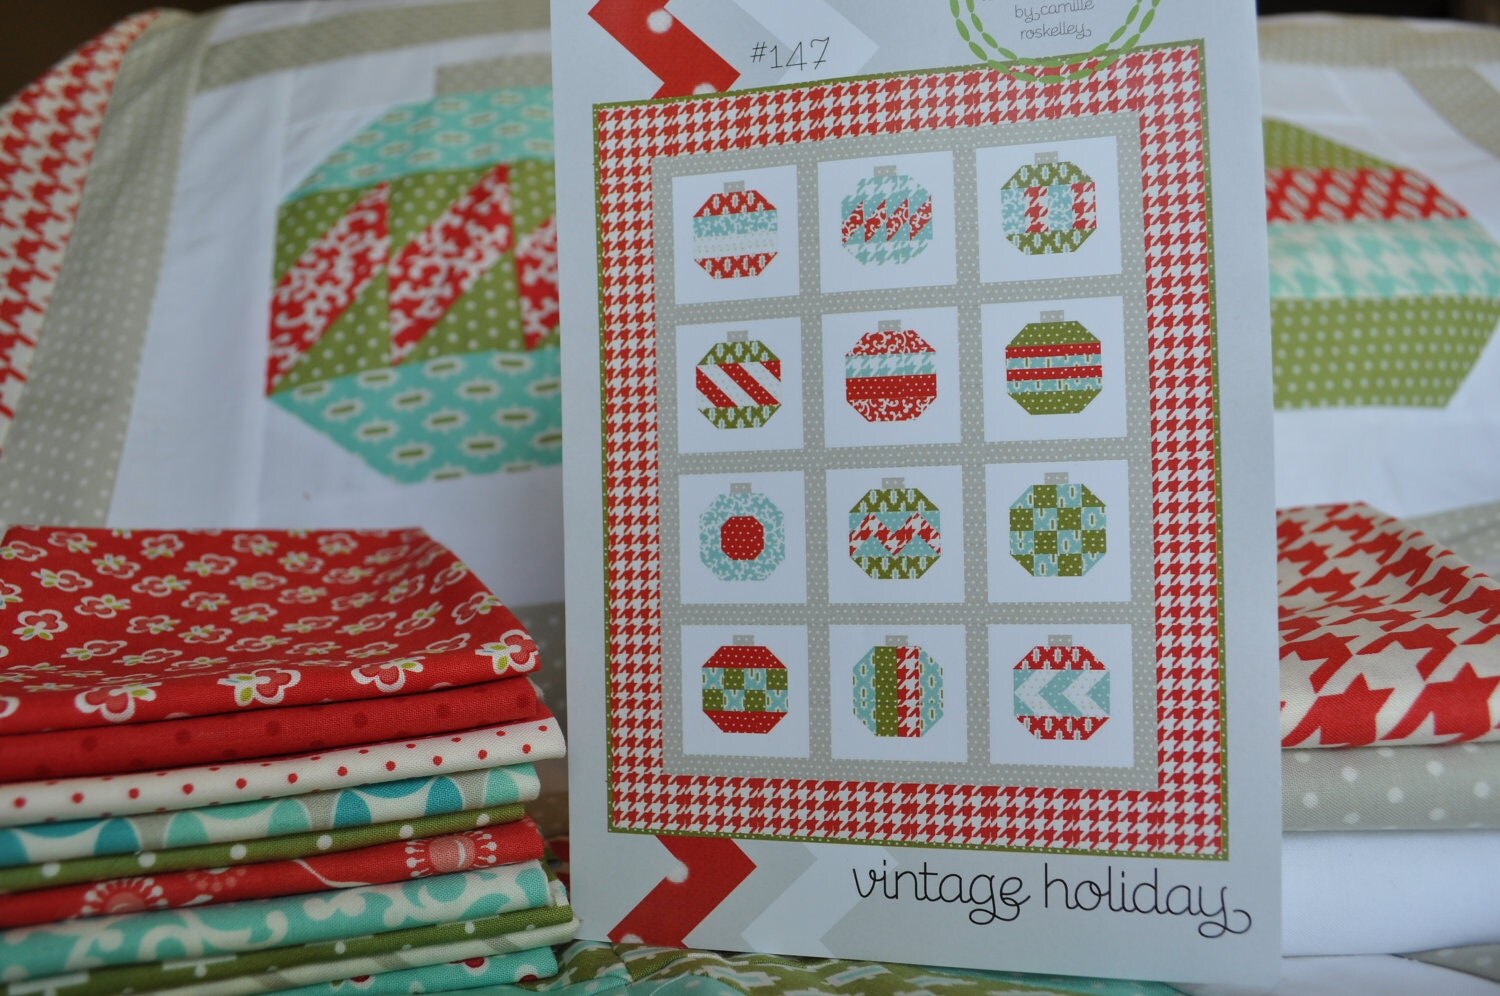 Vintage Holiday Quilt Kit by RedBucketList on Etsy